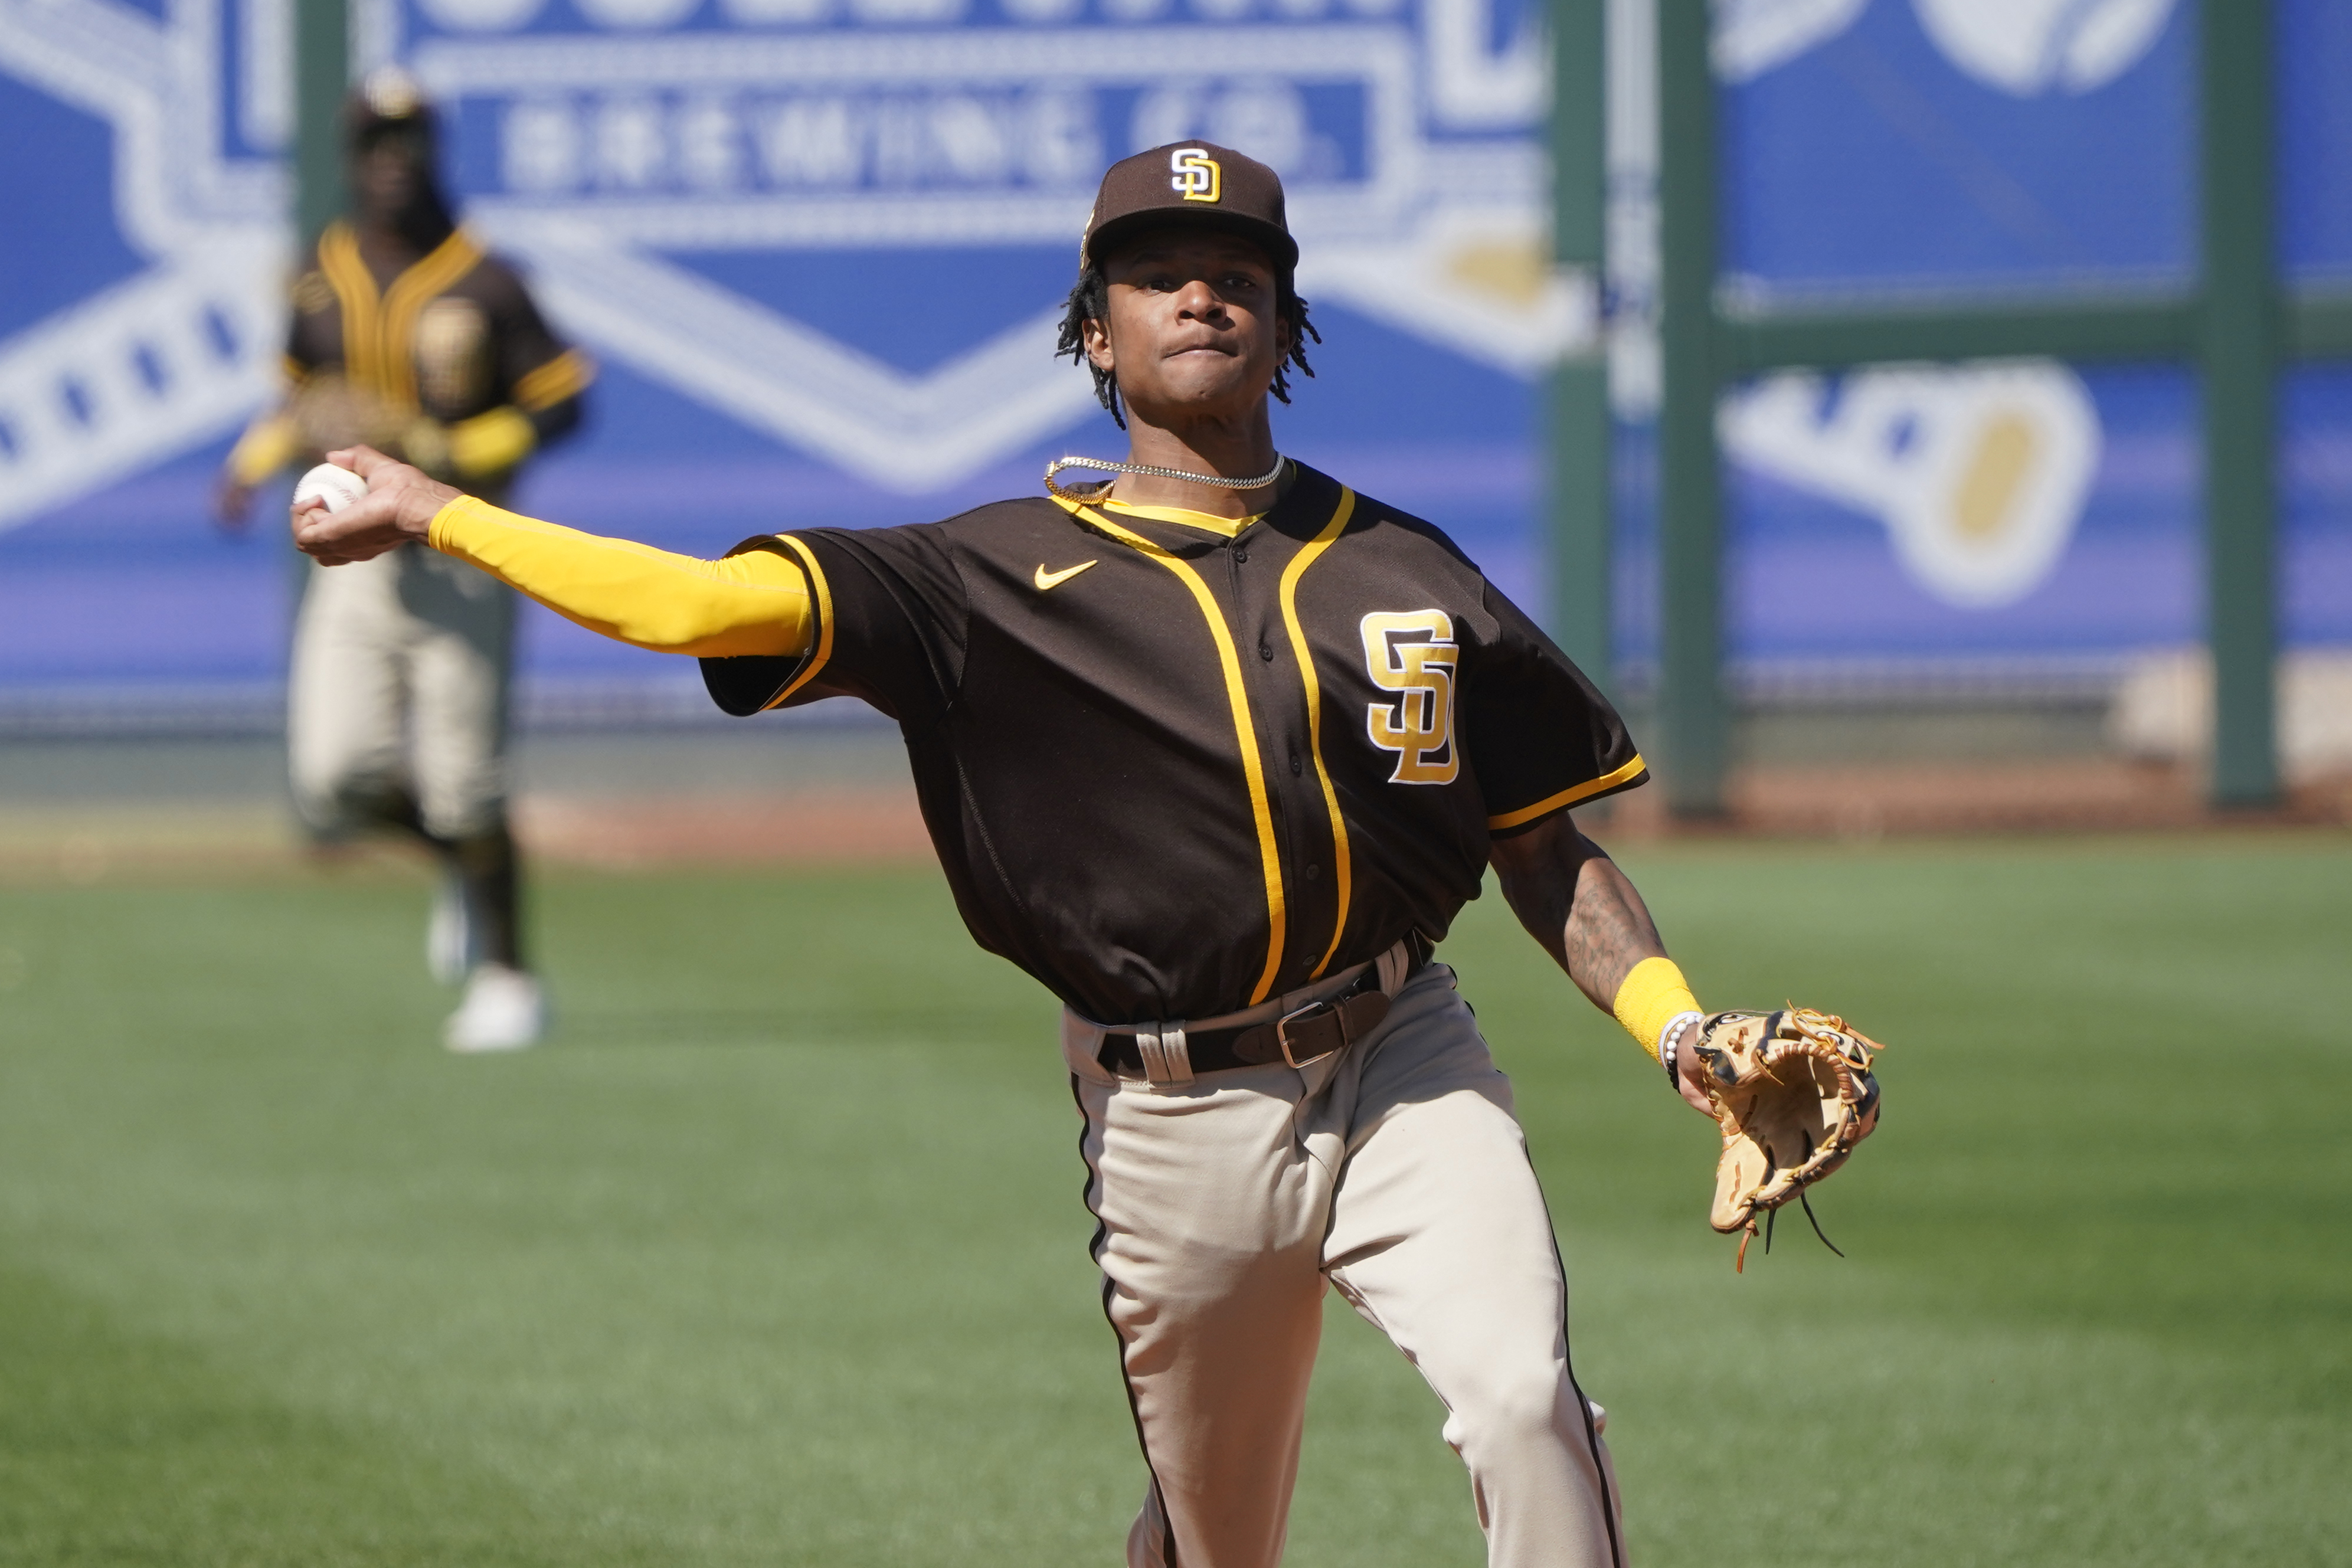 Padres' CJ Abrams out for Season with Injury After Collision; MLB's No. 8 Prospe..